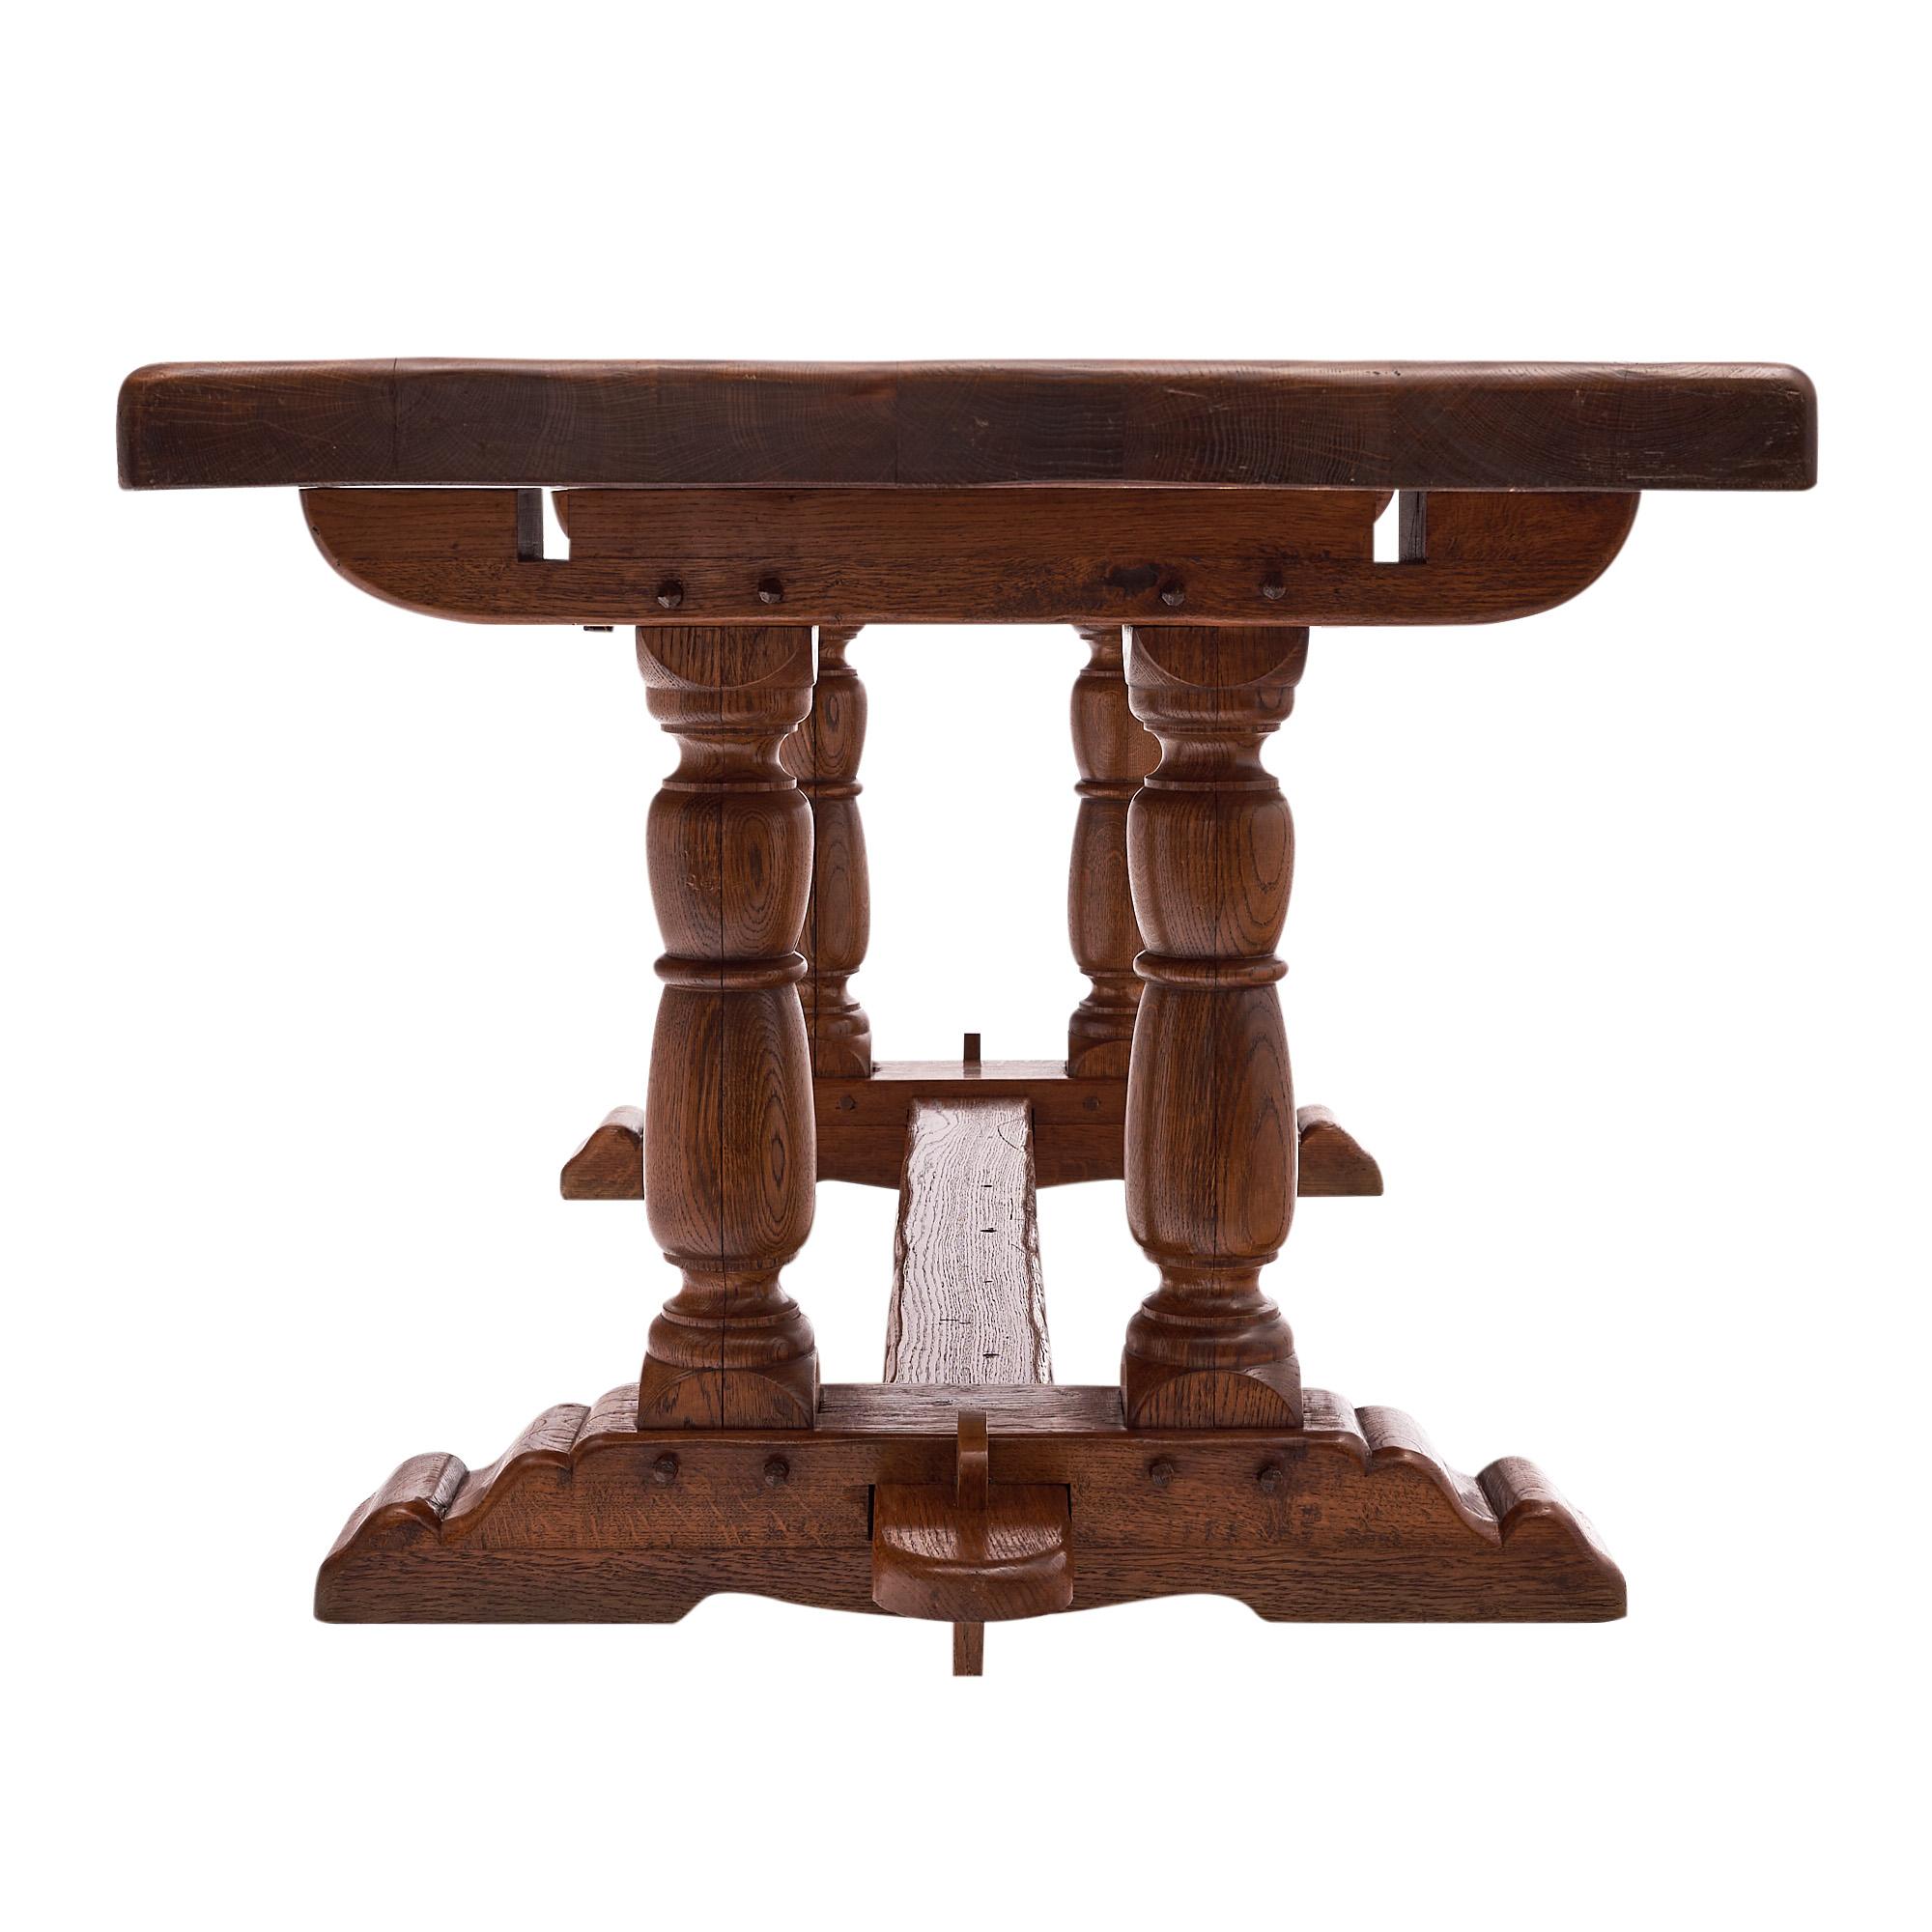 Dining table from France made of solid oak. This piece has a base with double column pedestals and peg construction throughout. It has been finished with wax and the top is 3.75” thick.